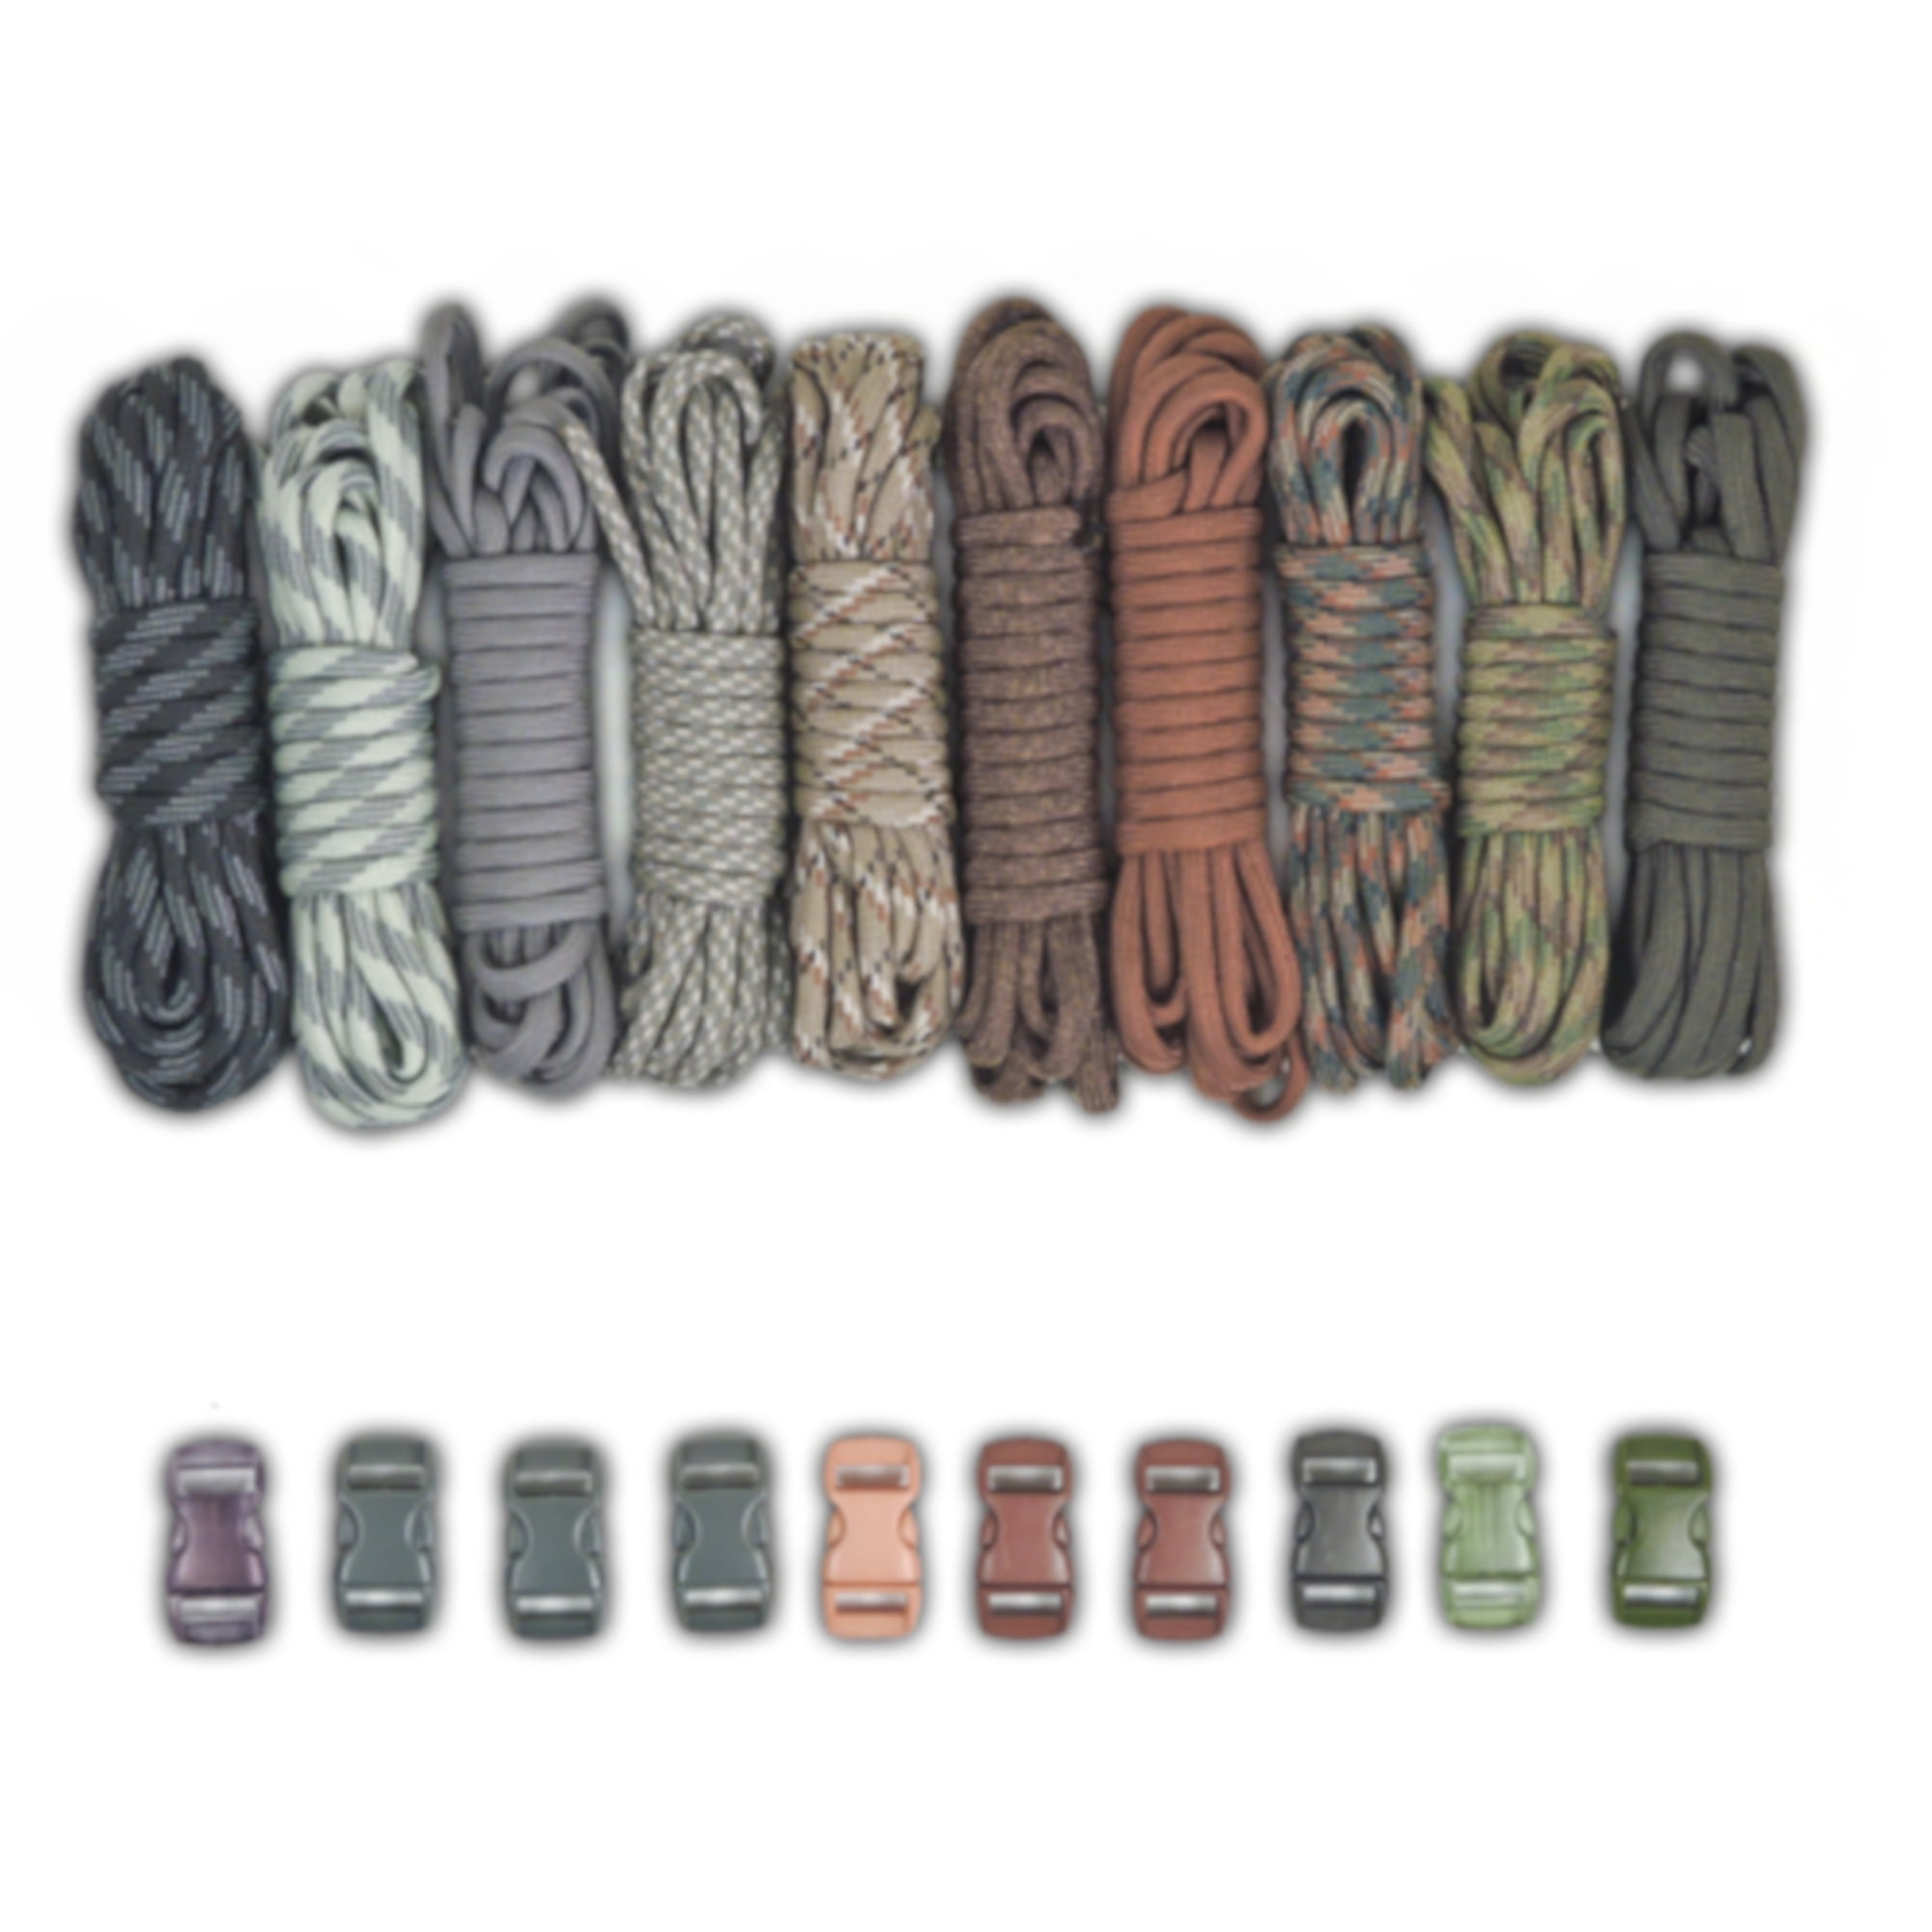 Paracord Planet's Bracelet Crafting Kits with Buckles - Walmart.com